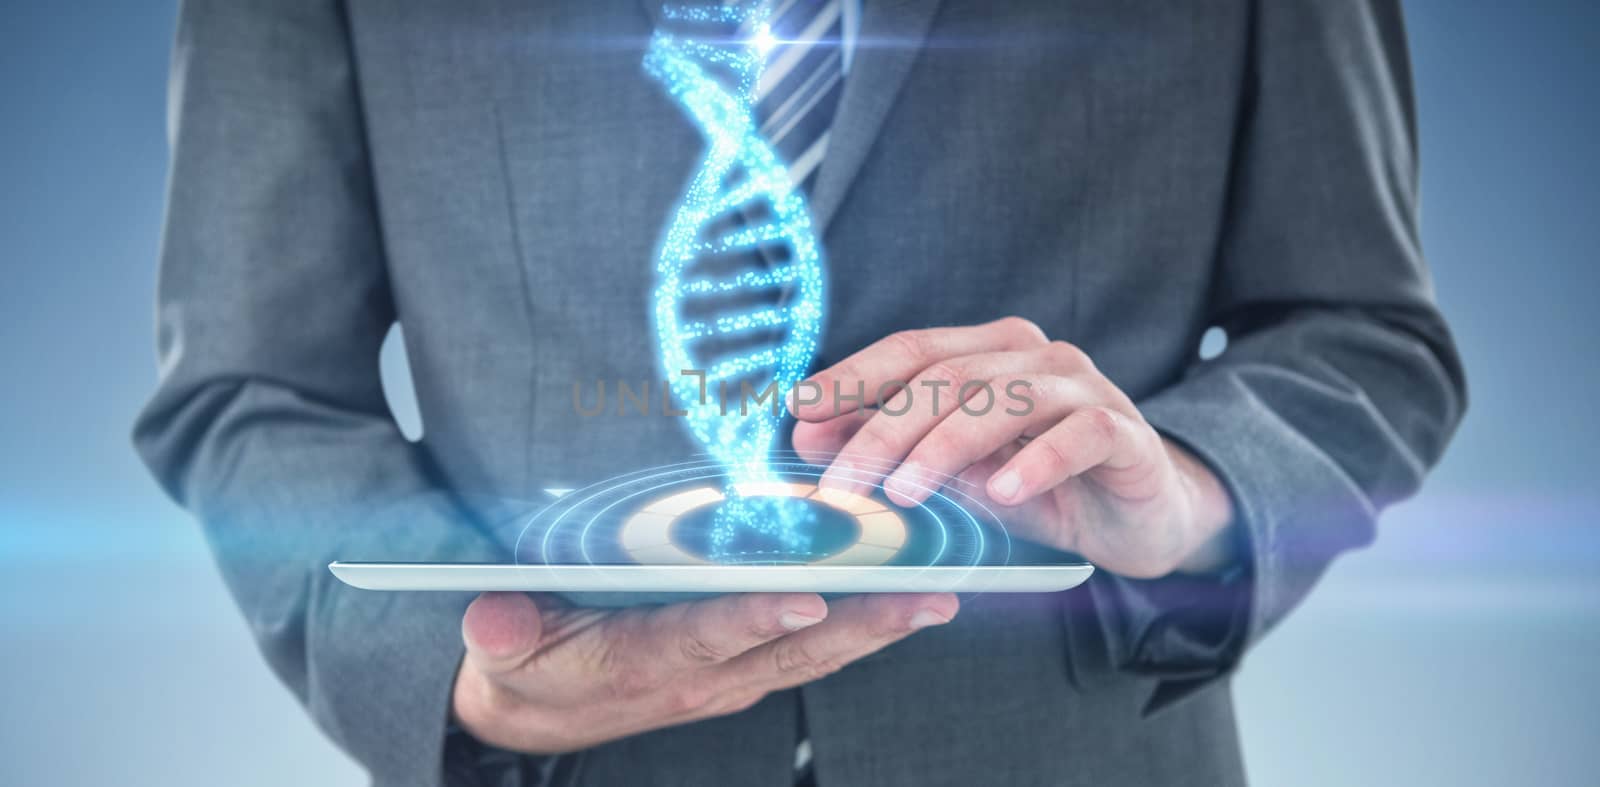 Businessman using digital tablet against digitally generated image of illuminated volume knob with dna strand